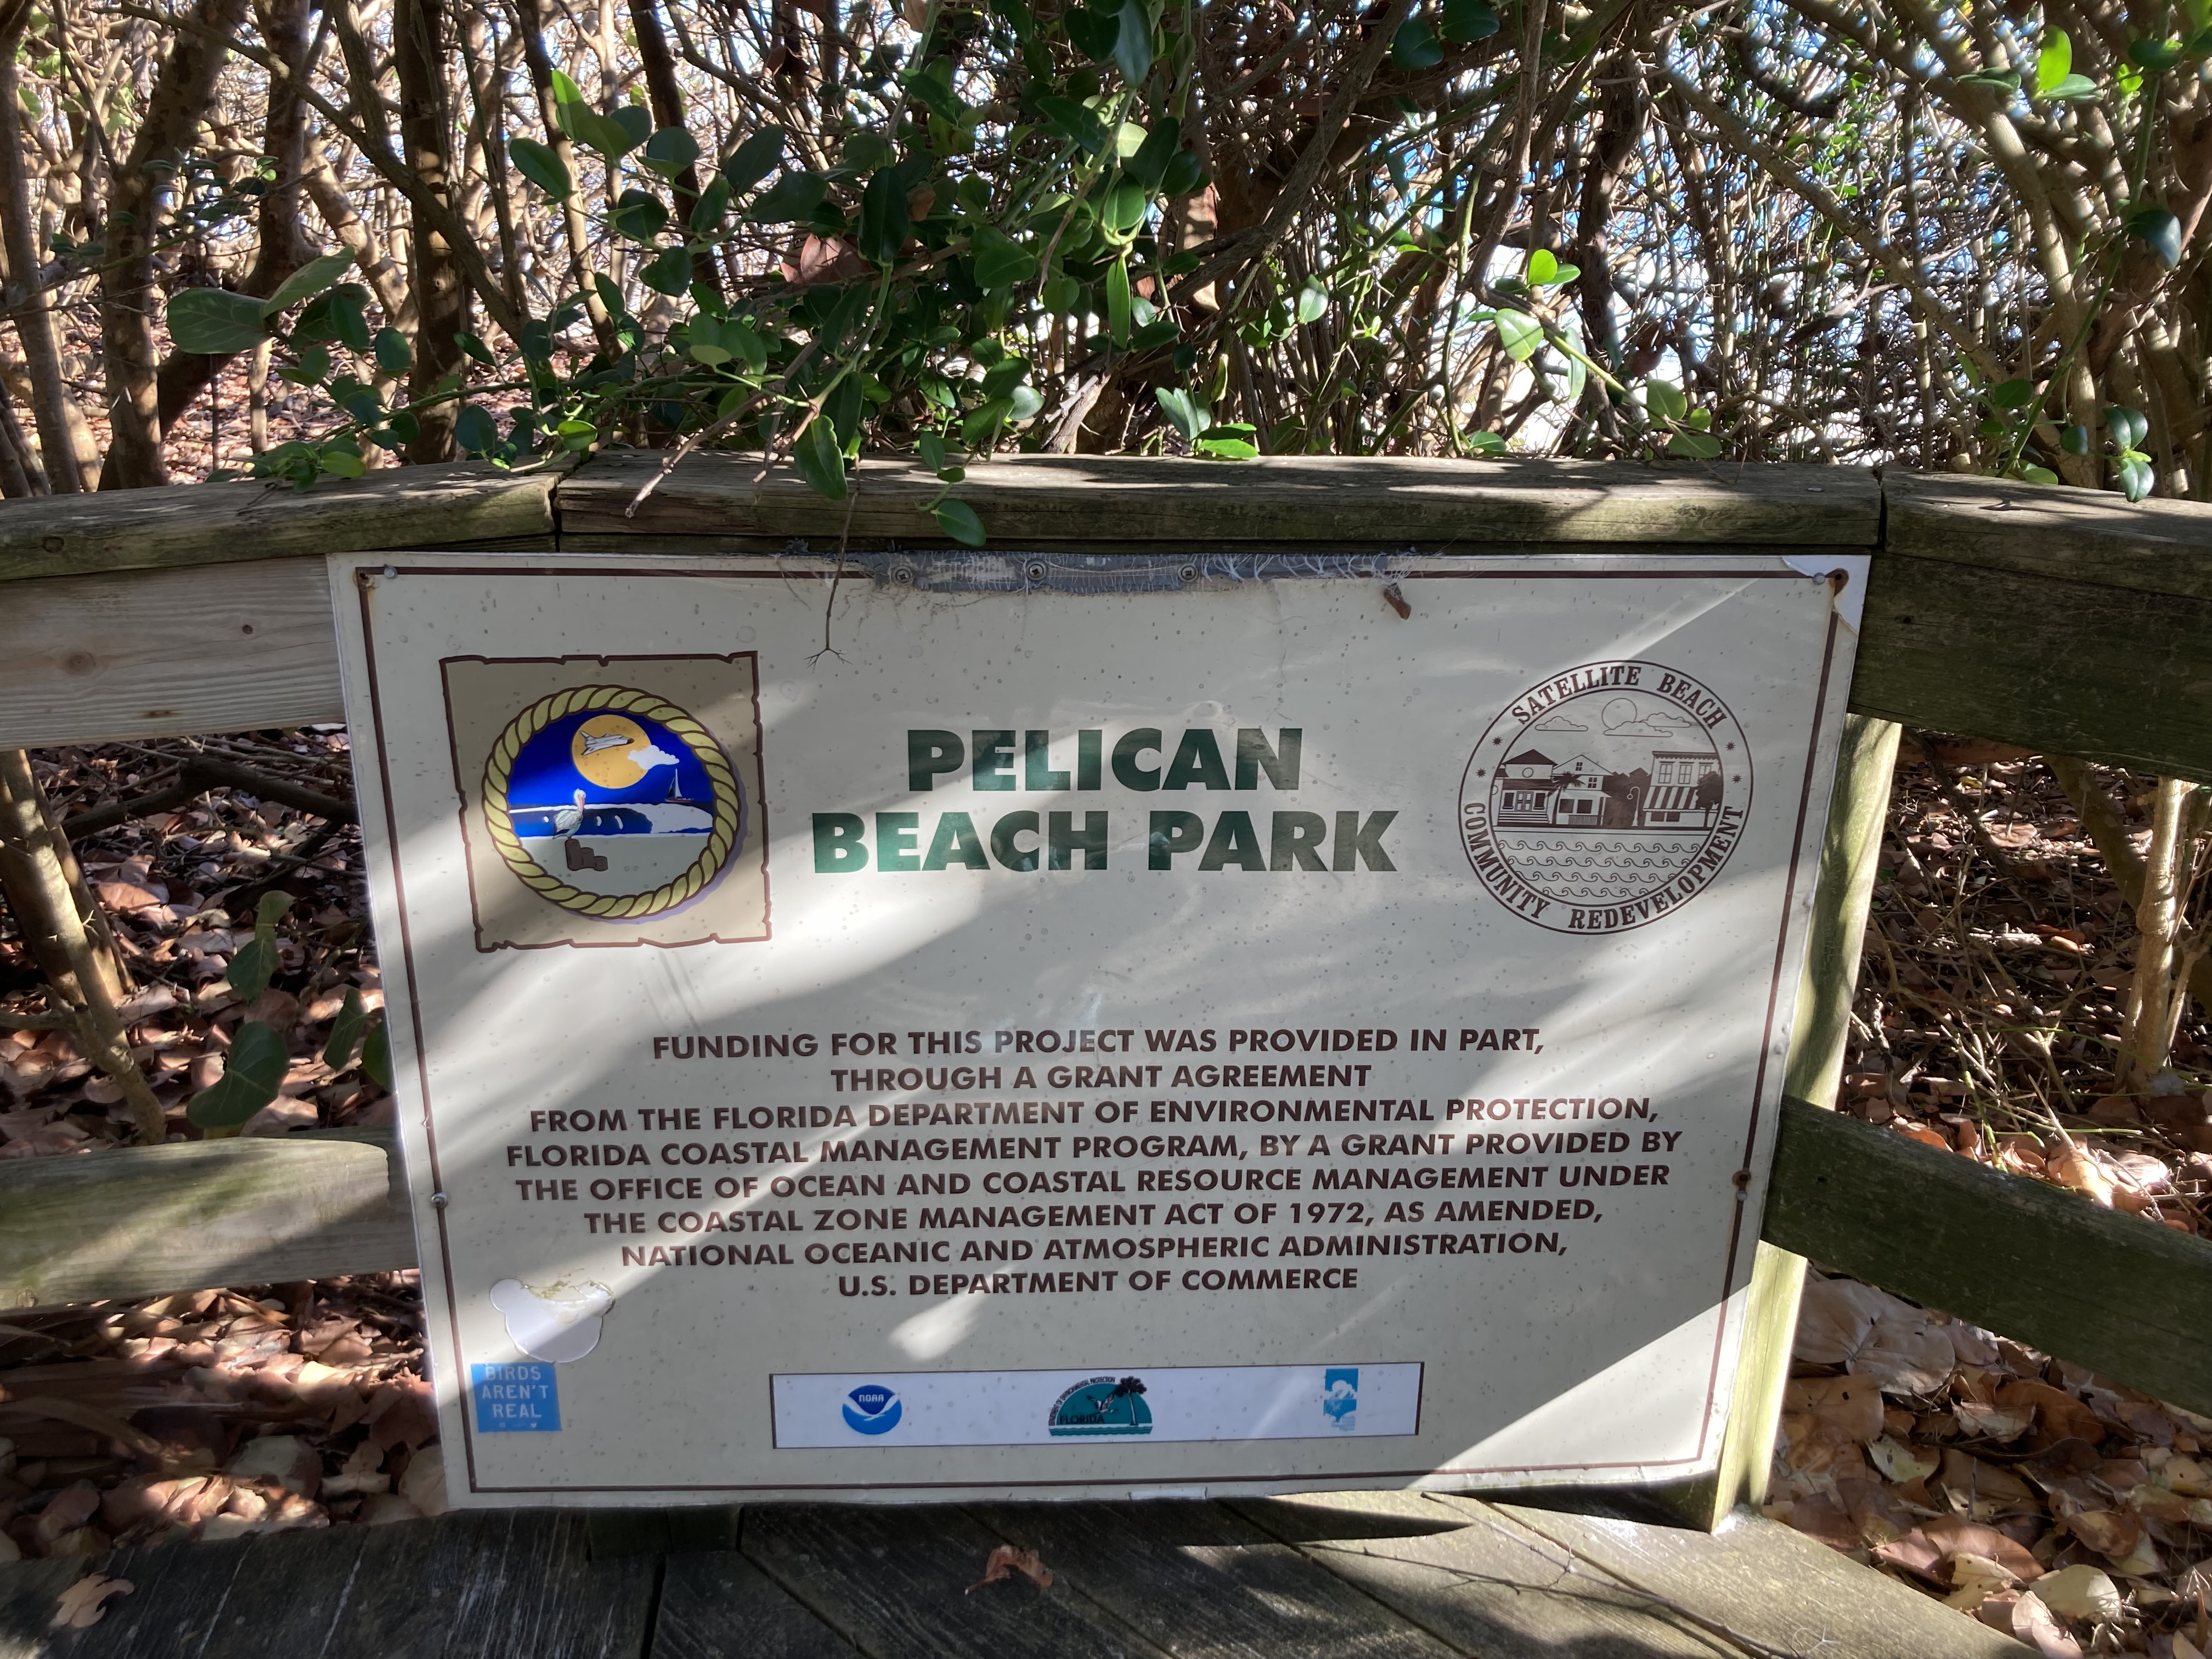 Sign of Belican Beach Park, located below some seagrapes.